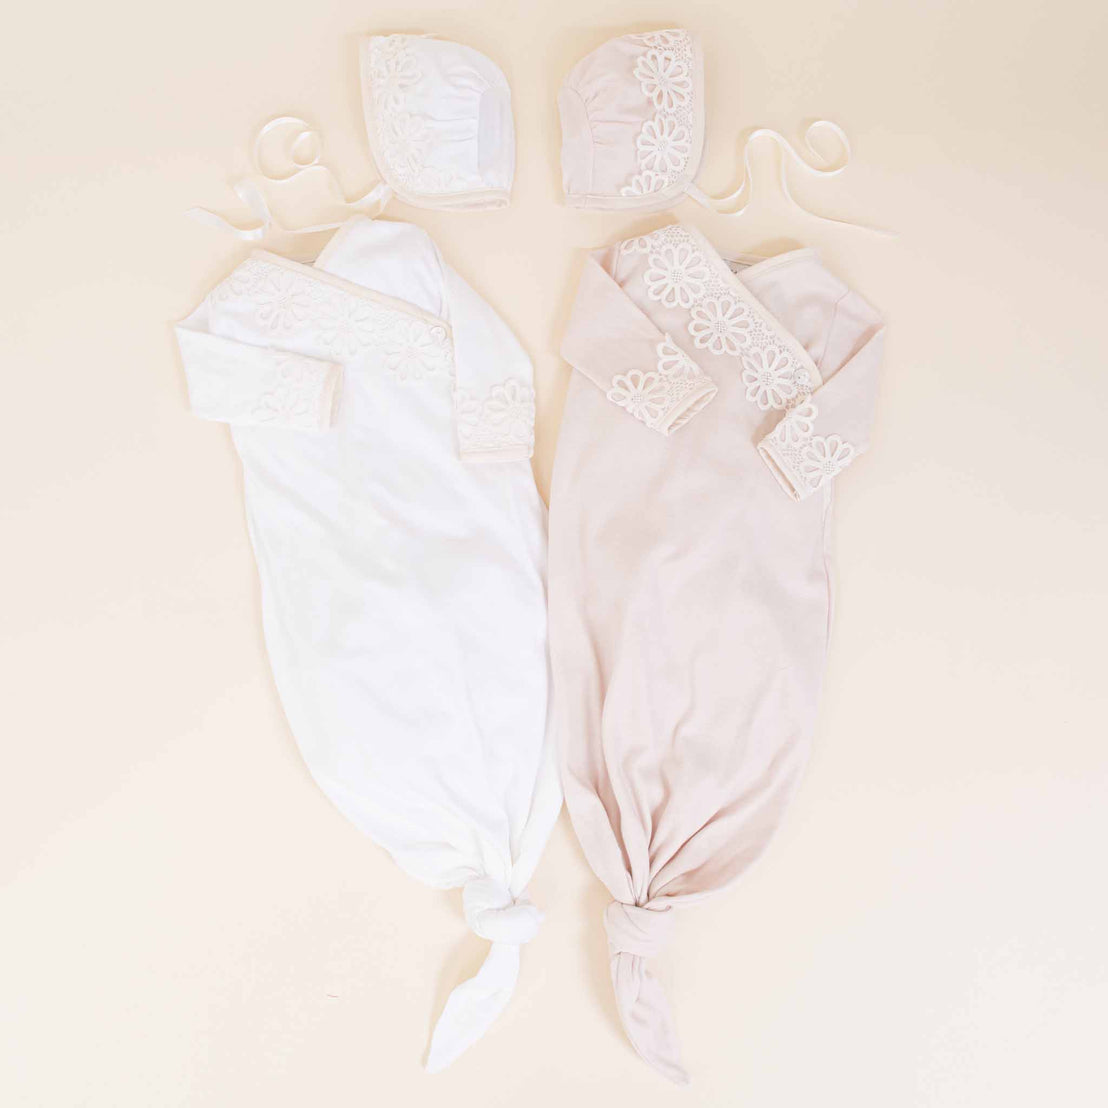 Two Hannah Knot Gowns & Bonnets by Baby Beau & Belle, displayed on hangers against a light beige background. One outfit is white and one is pastel pink, both adorned with lace detailing.